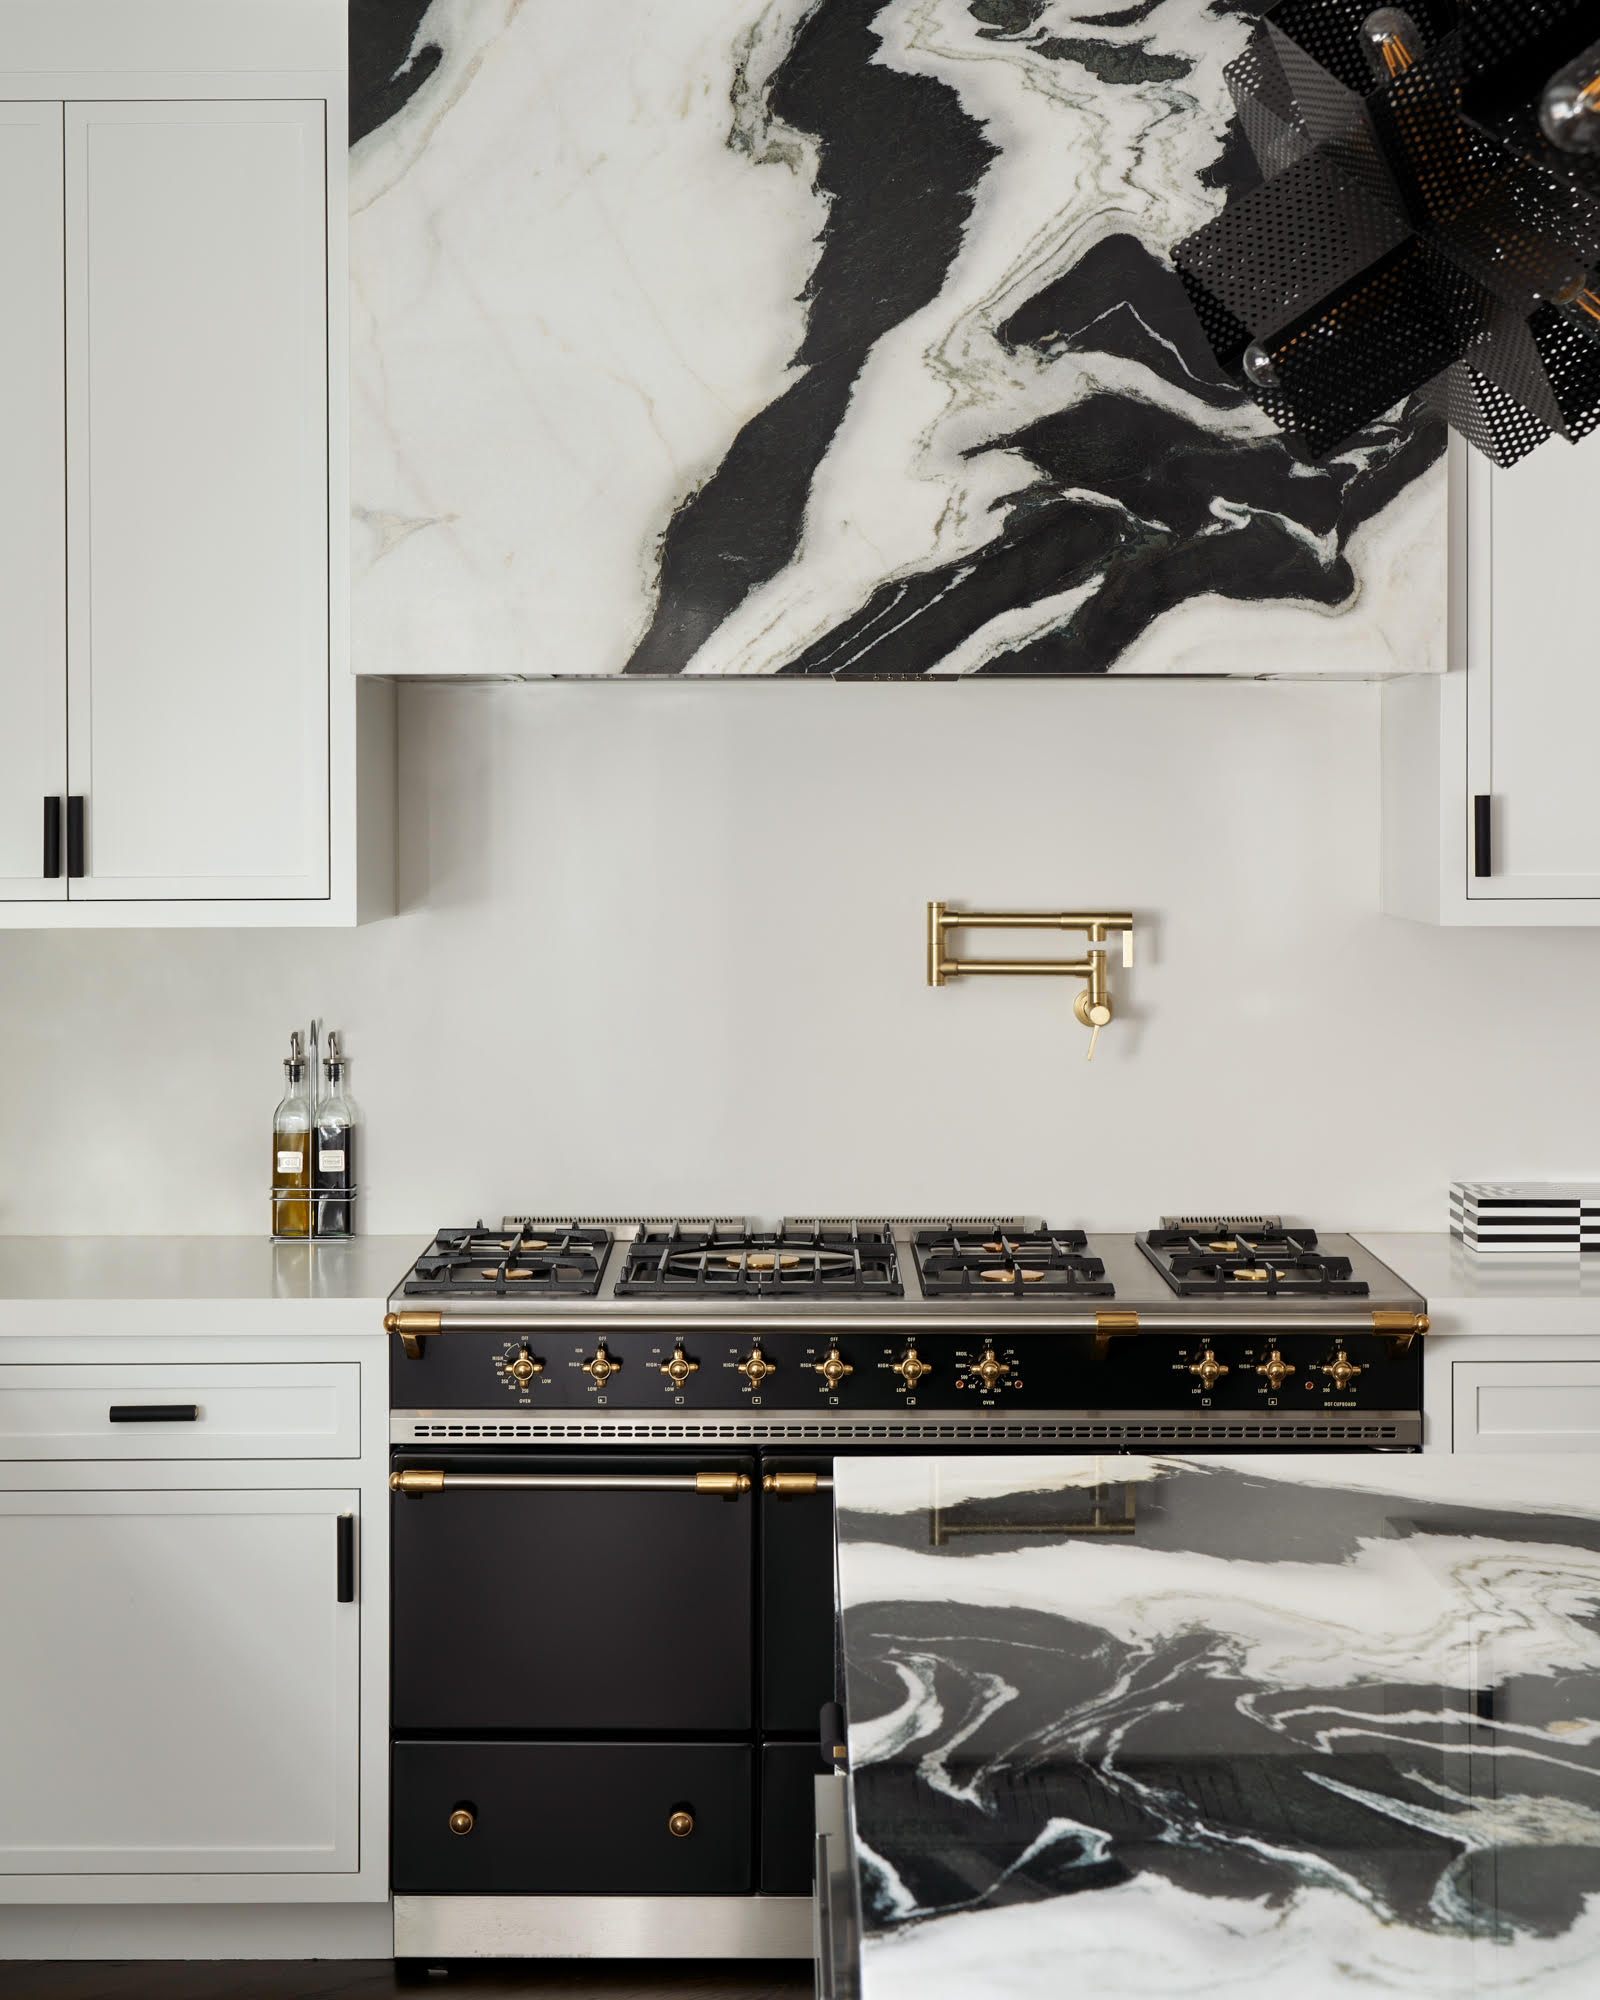 2022 kitchen designs black and white statement marble hood and range 